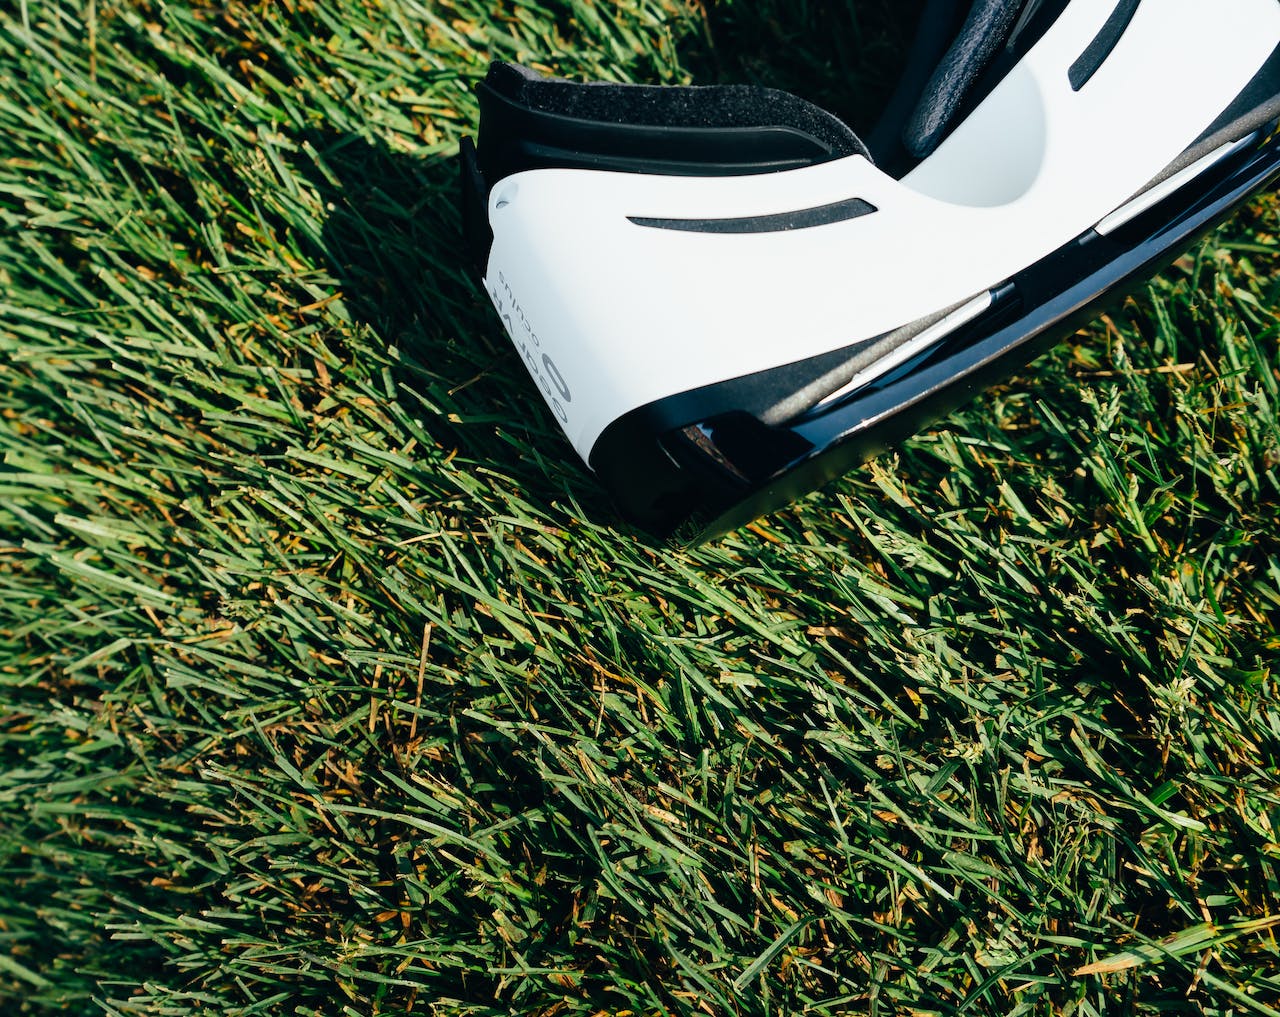 White and Black Vr Headset on Green Grass